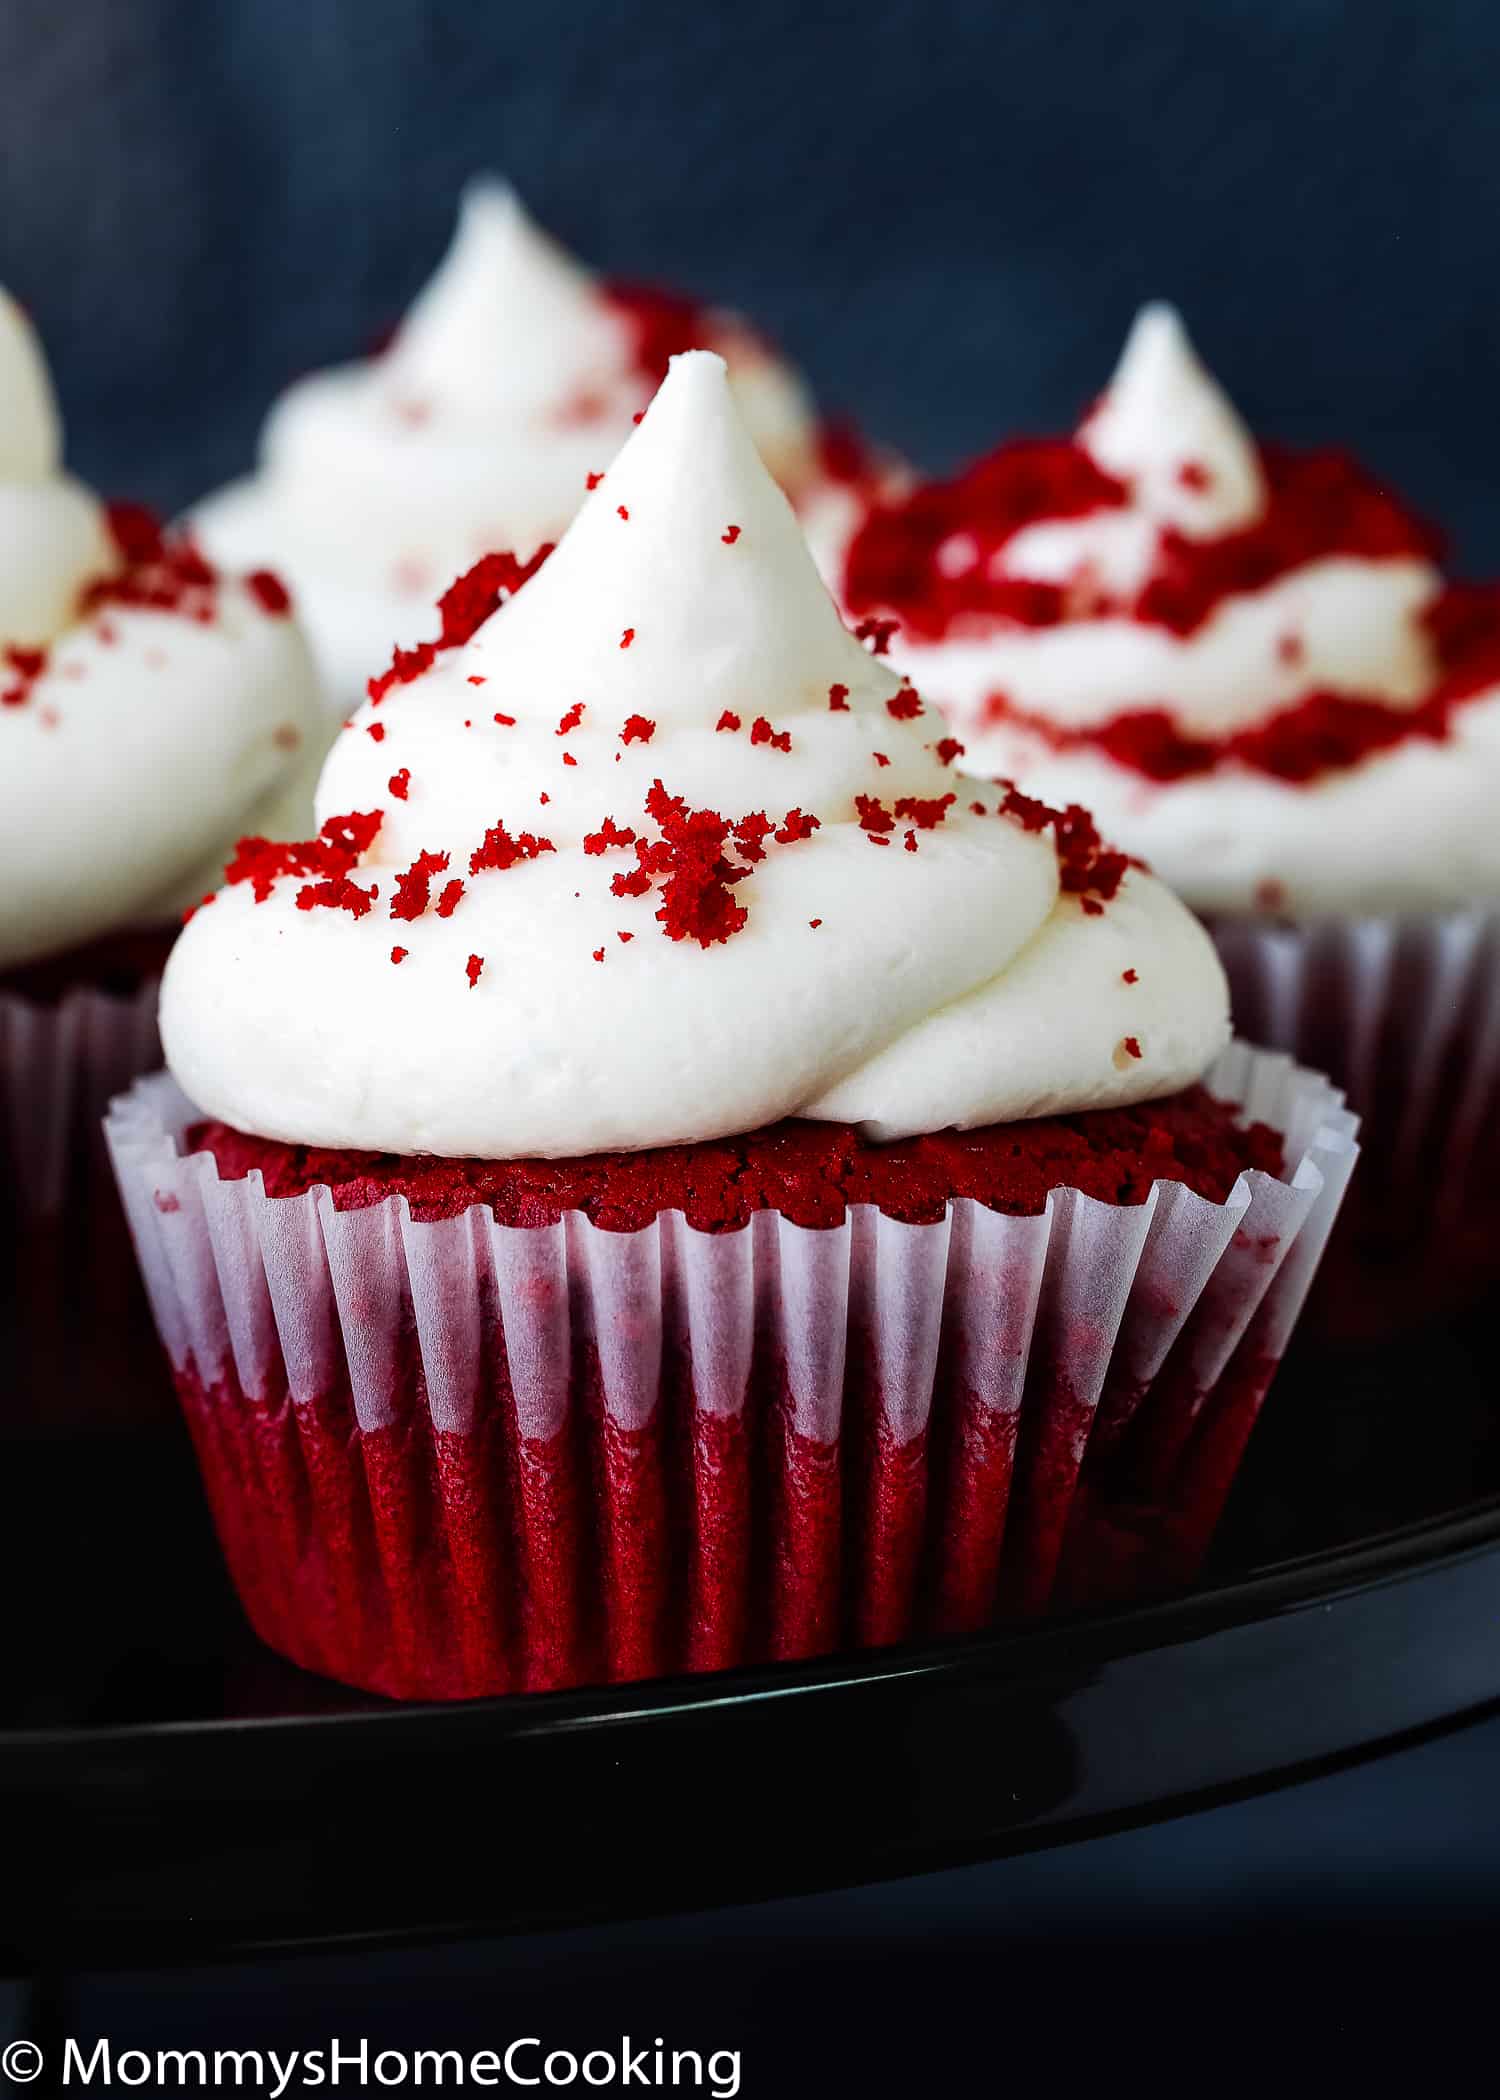 Egg-free red velvet cupcake with frosting and red velvet crumble on top.